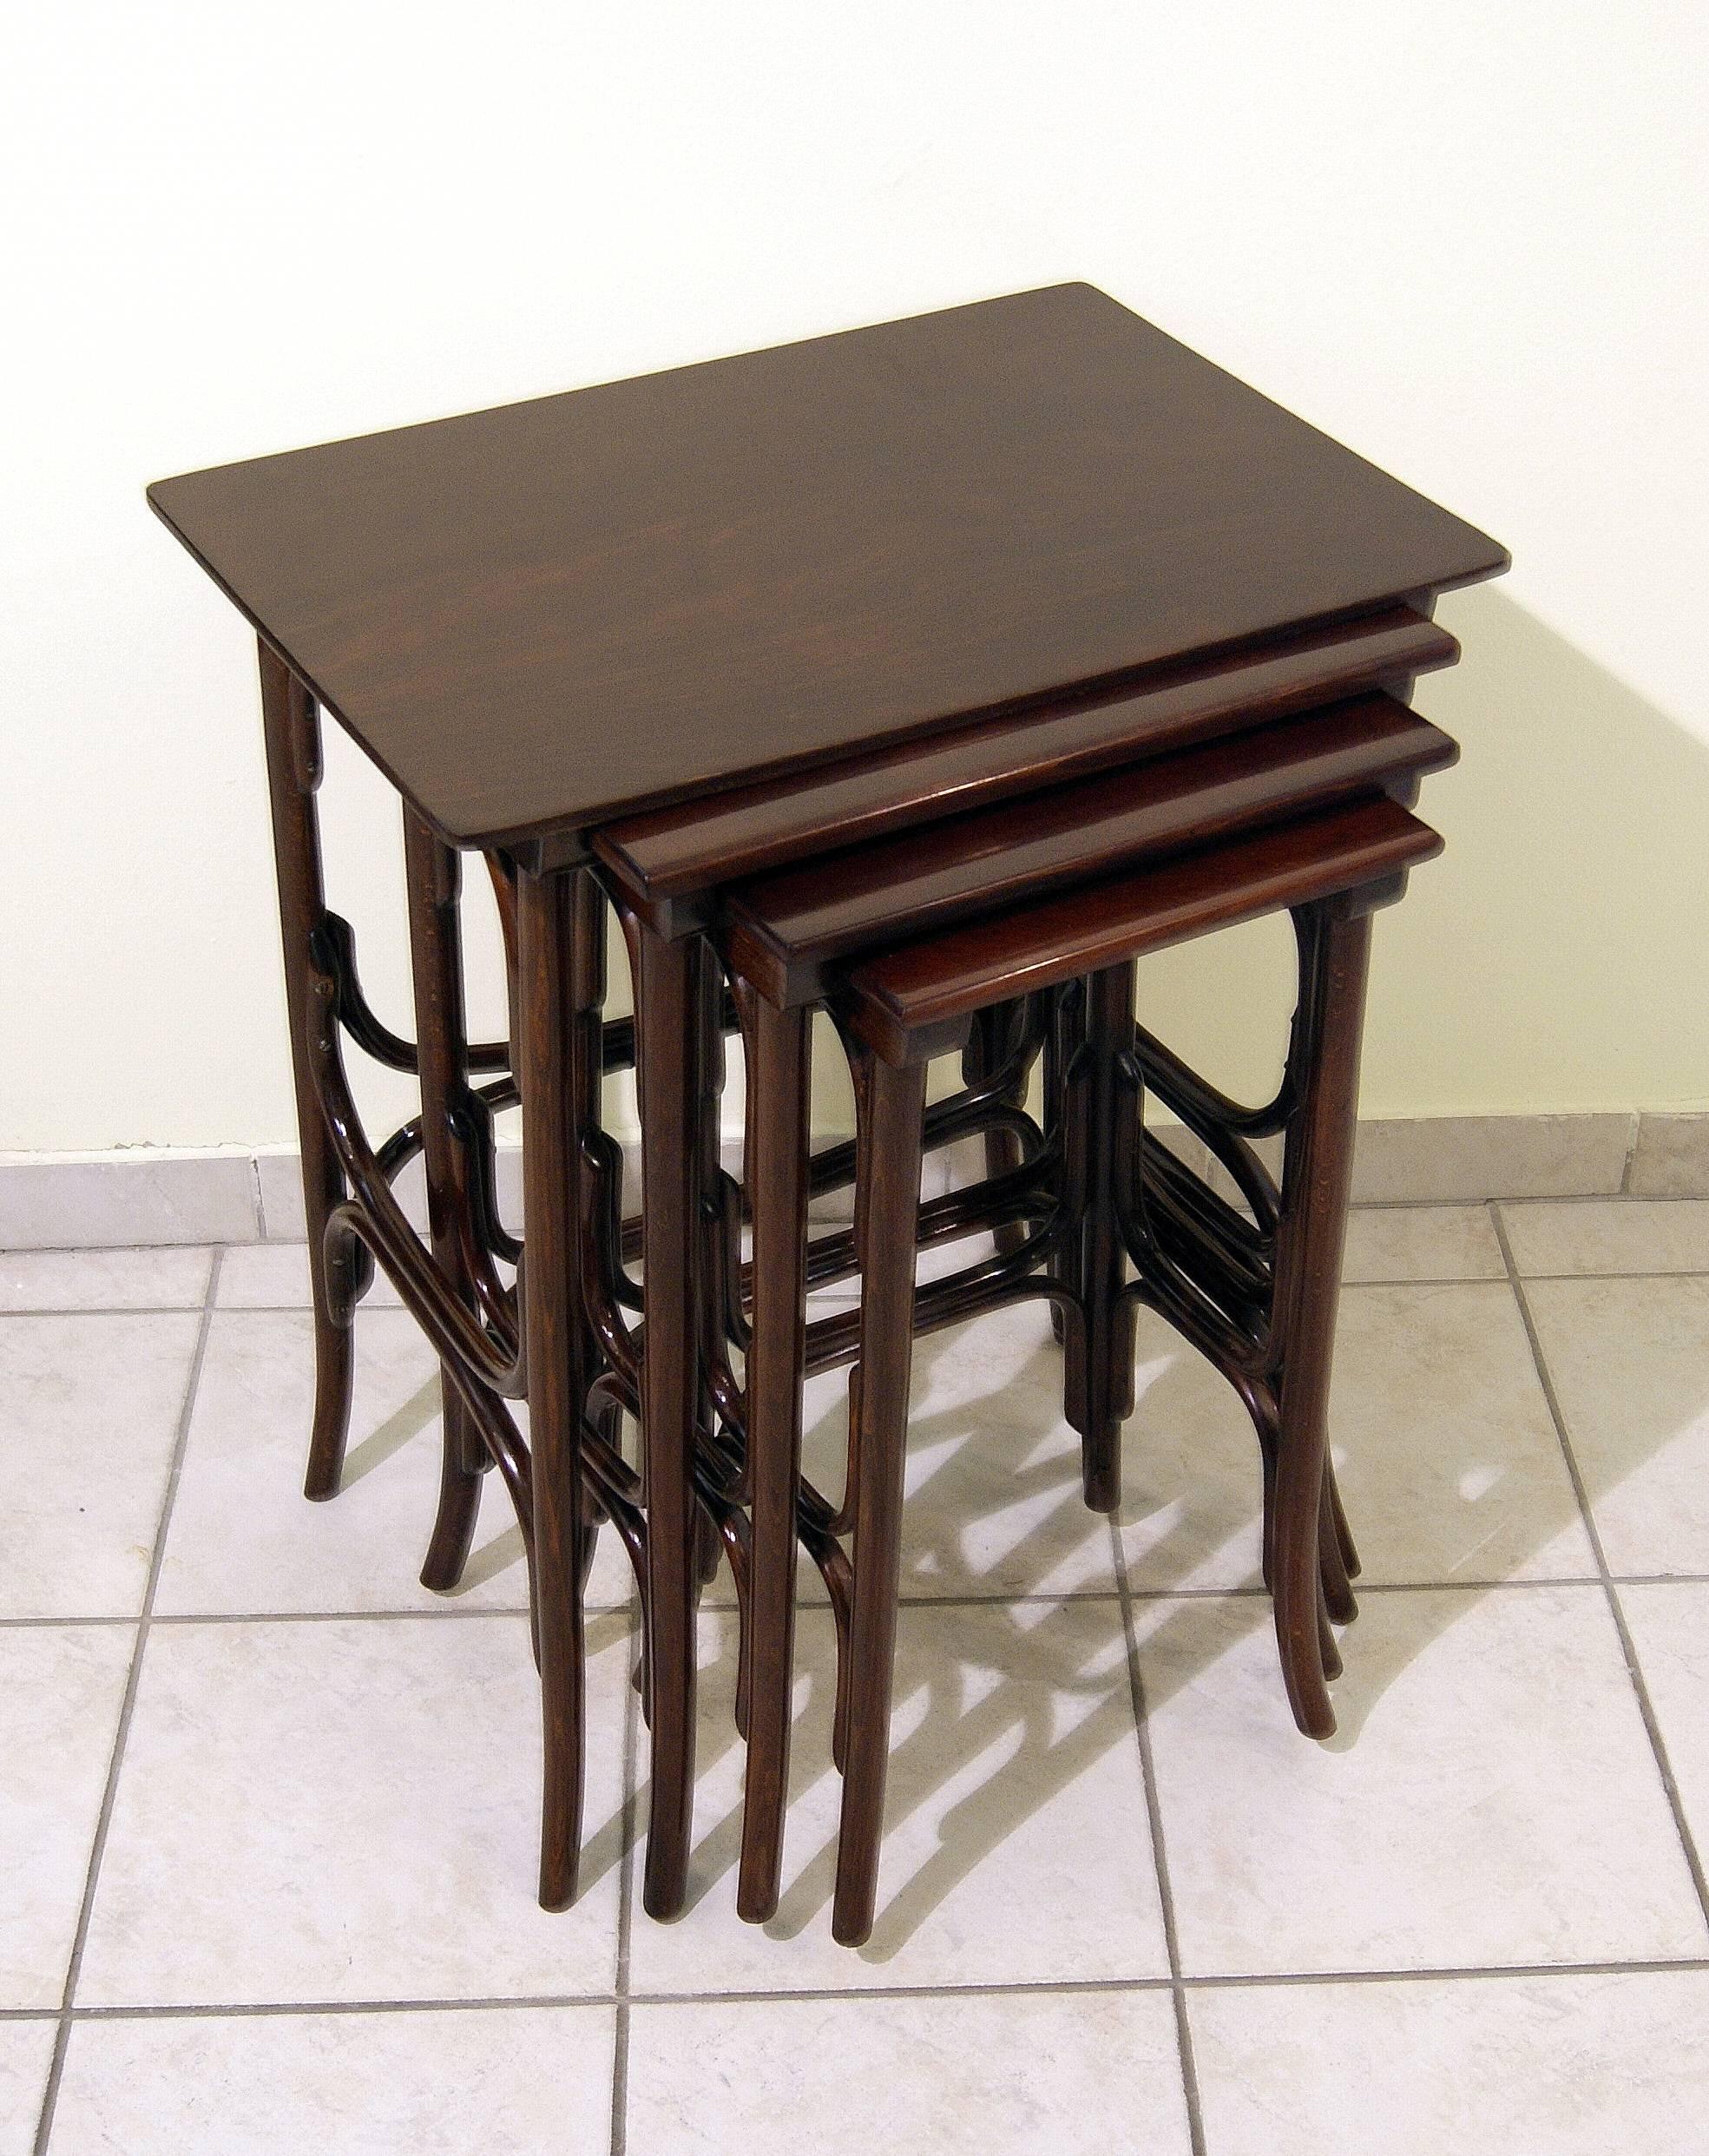 Thonet Art Nouveau Vienna nesting tables.
Model number 10.
designed, circa 1900.
Vienna, made circa 1905.
 
Beechwood/dark mahogany stained/
Refurbished by Hand.

Measures of largest table:
Height: 72.0 cm 28.34 inches.
Width: 60.0 cm